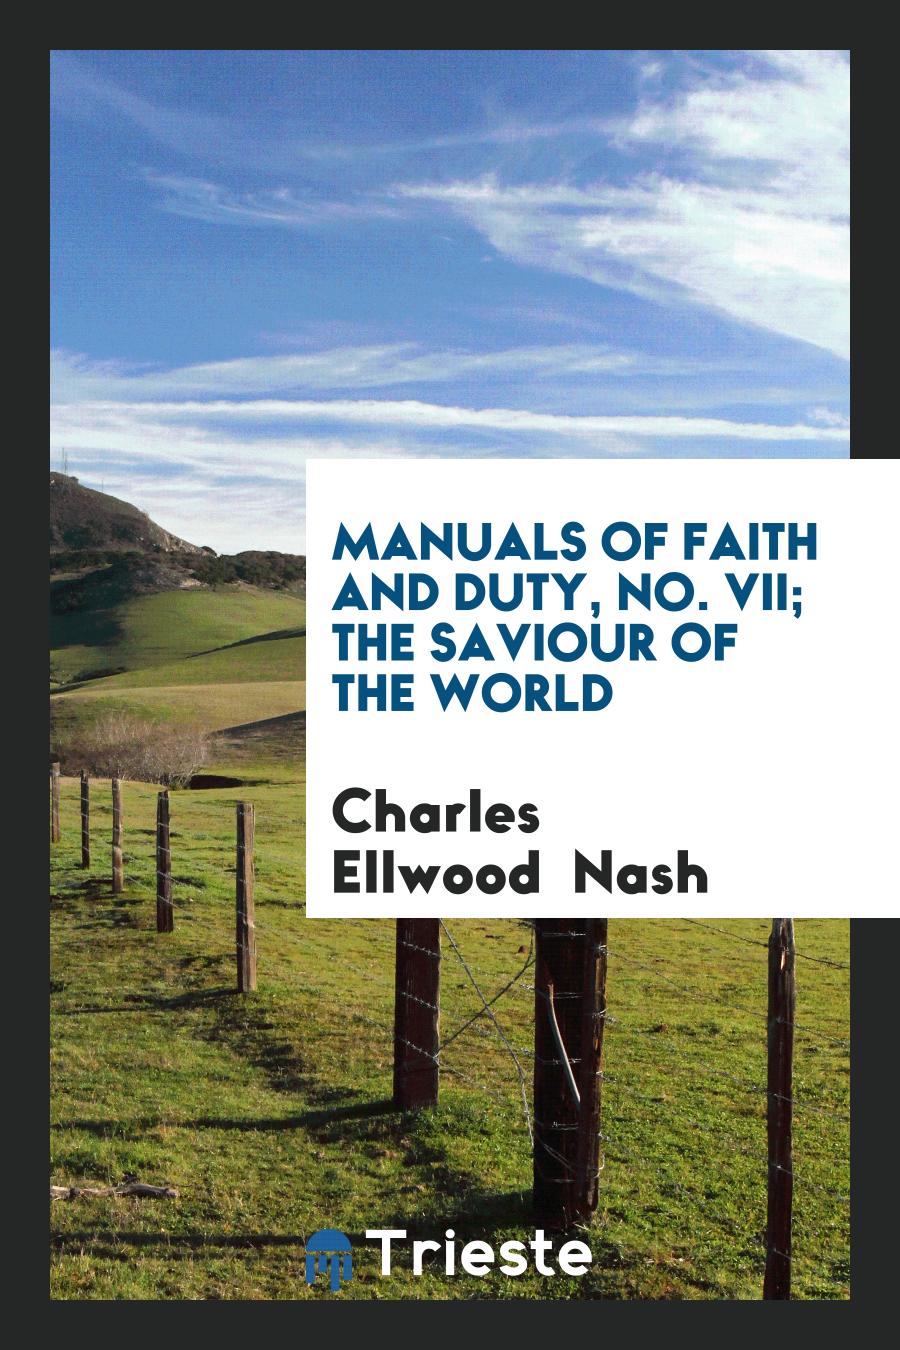 Manuals of Faith and Duty, No. VII; The Saviour of the World